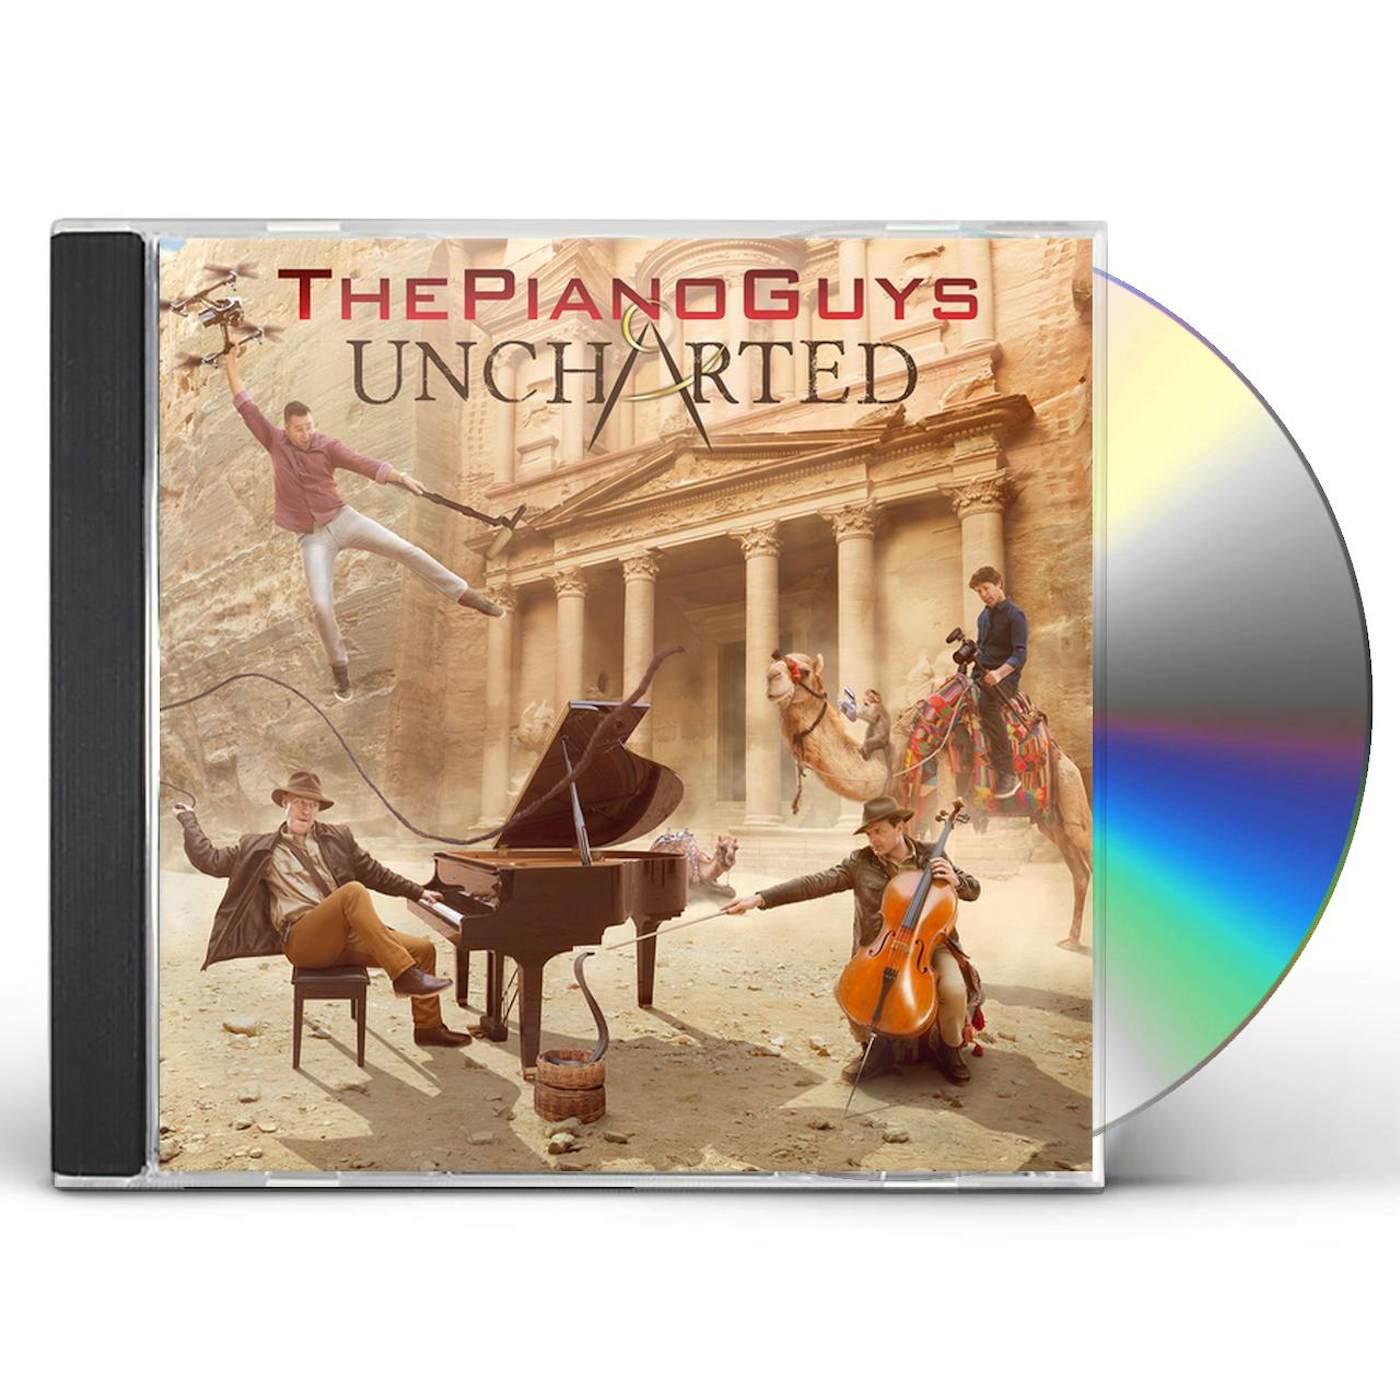 The Piano Guys UNCHARTED CD